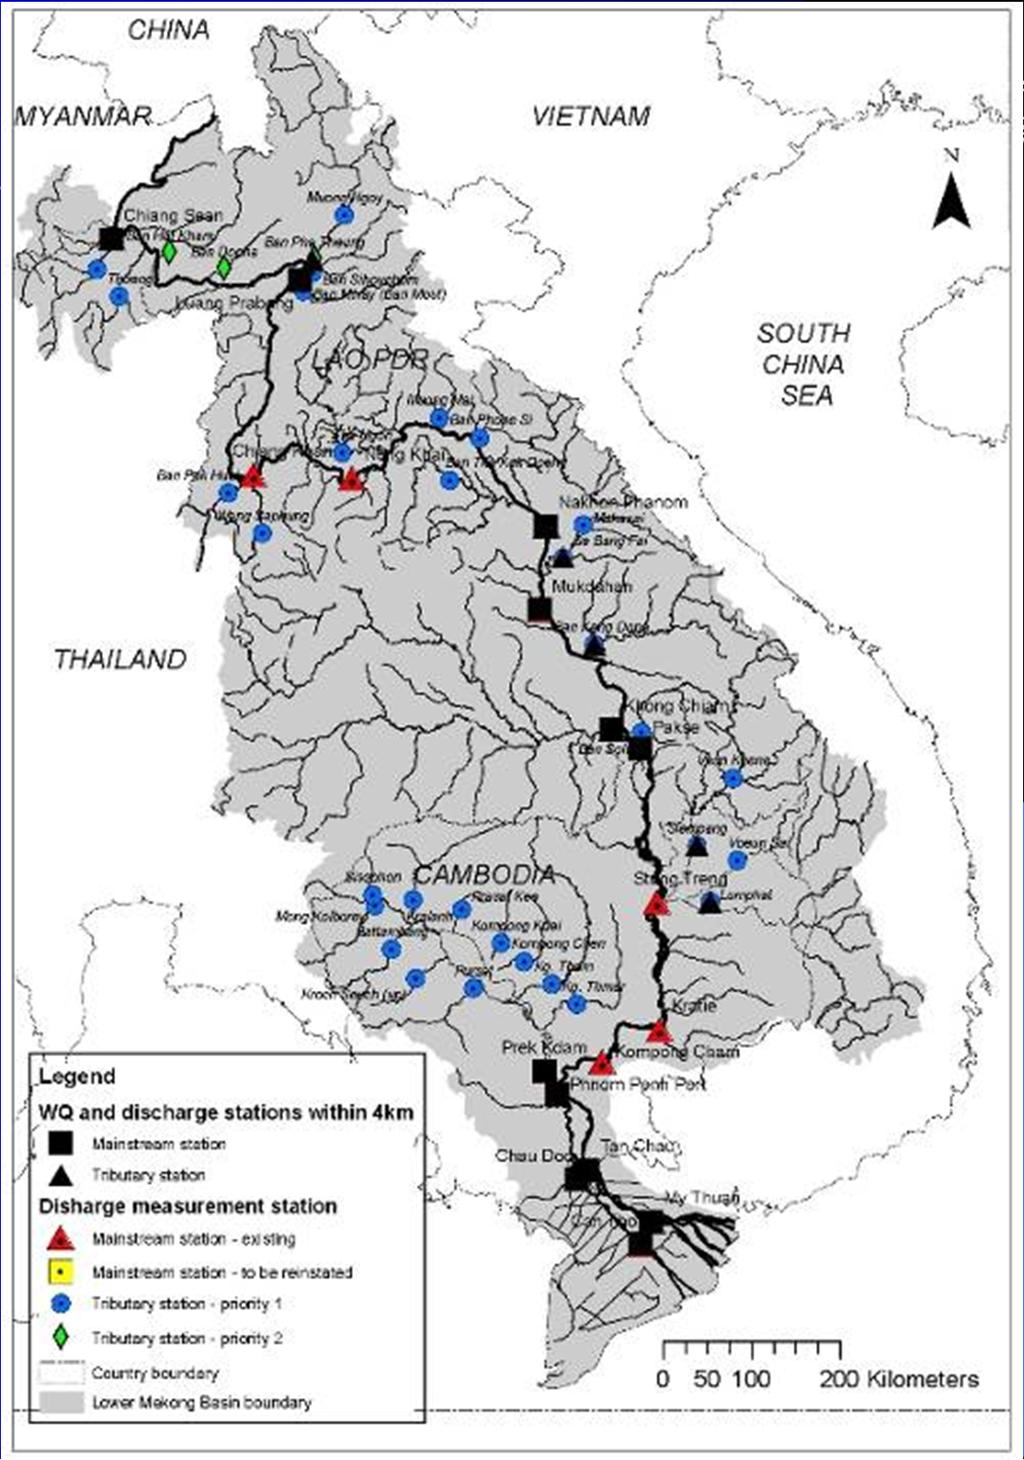 Core Activity 11 Integrate water quality, discharge and sediment monitoring networks (p61-65) Timeframe: 2009 or 2010 Synchronised